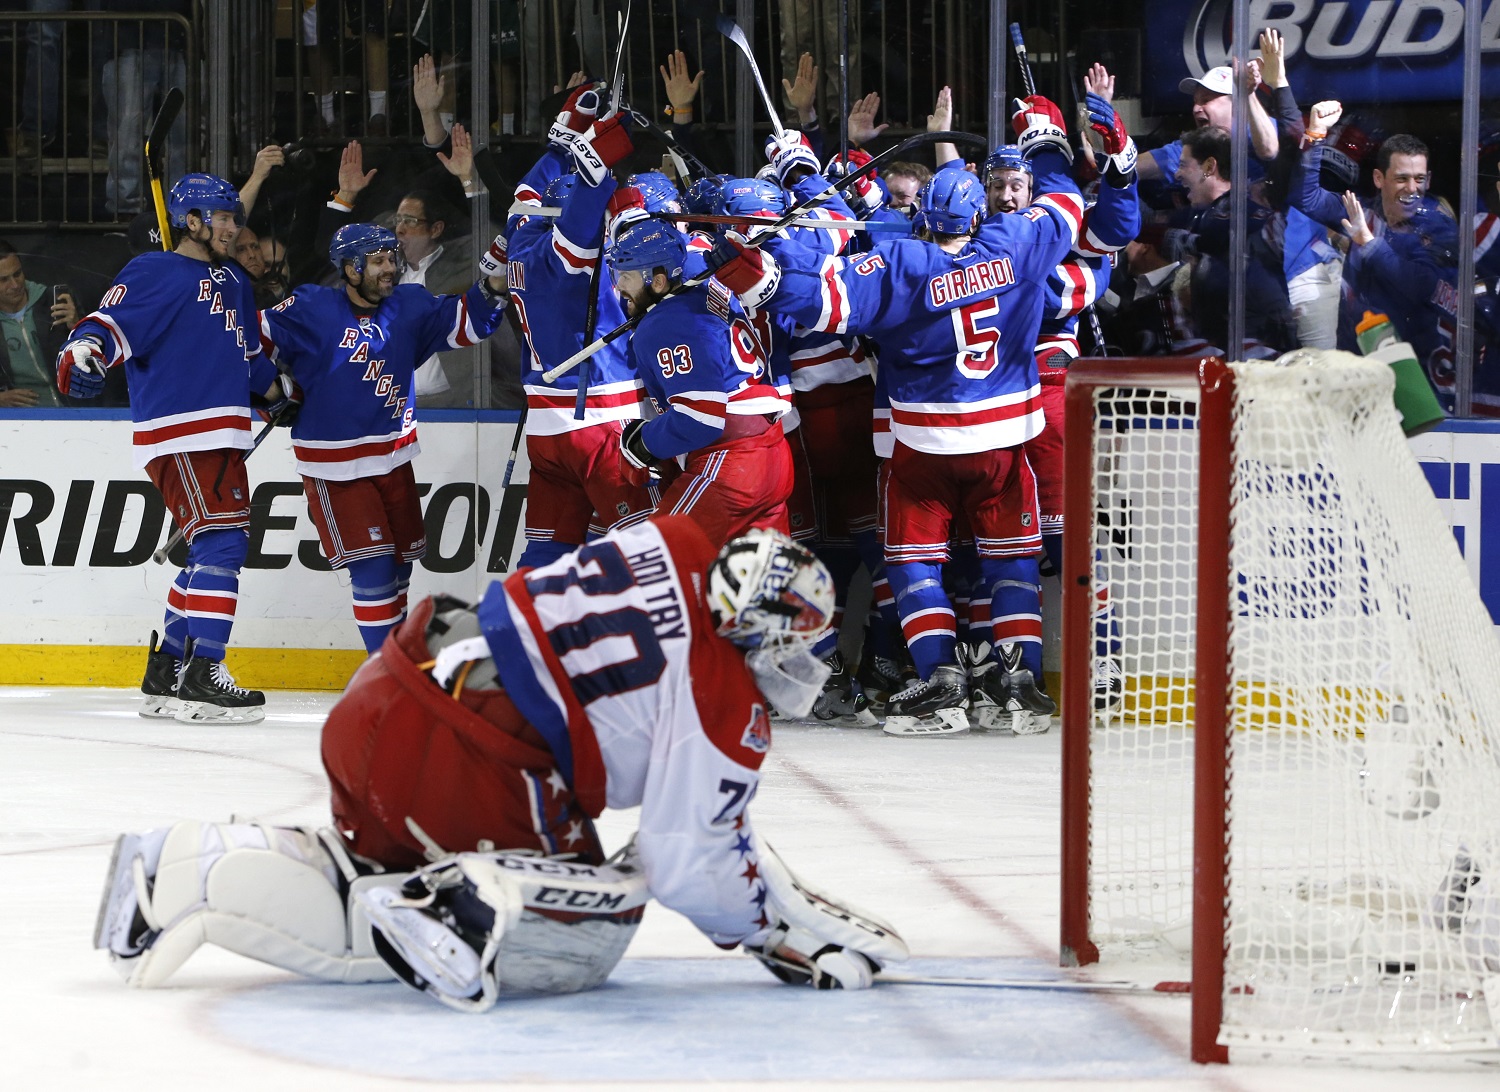 FILE - In this May 13, 2015, file photo, the New York Rangers celebrate the game winning goal by center Derek Stepan (21) against the Washington Capitals as Capitals goalie Braden Holtby looks at the puck in the net in overtime of Game 7 of the Eastern Conference semifinals during the NHL hockey Stanley Cup playoffs in New York. The Rangers won 2-1. The NHL's final four teams are 19-5 at home in the playoffs.  (AP Photo/Kathy Willens, File)